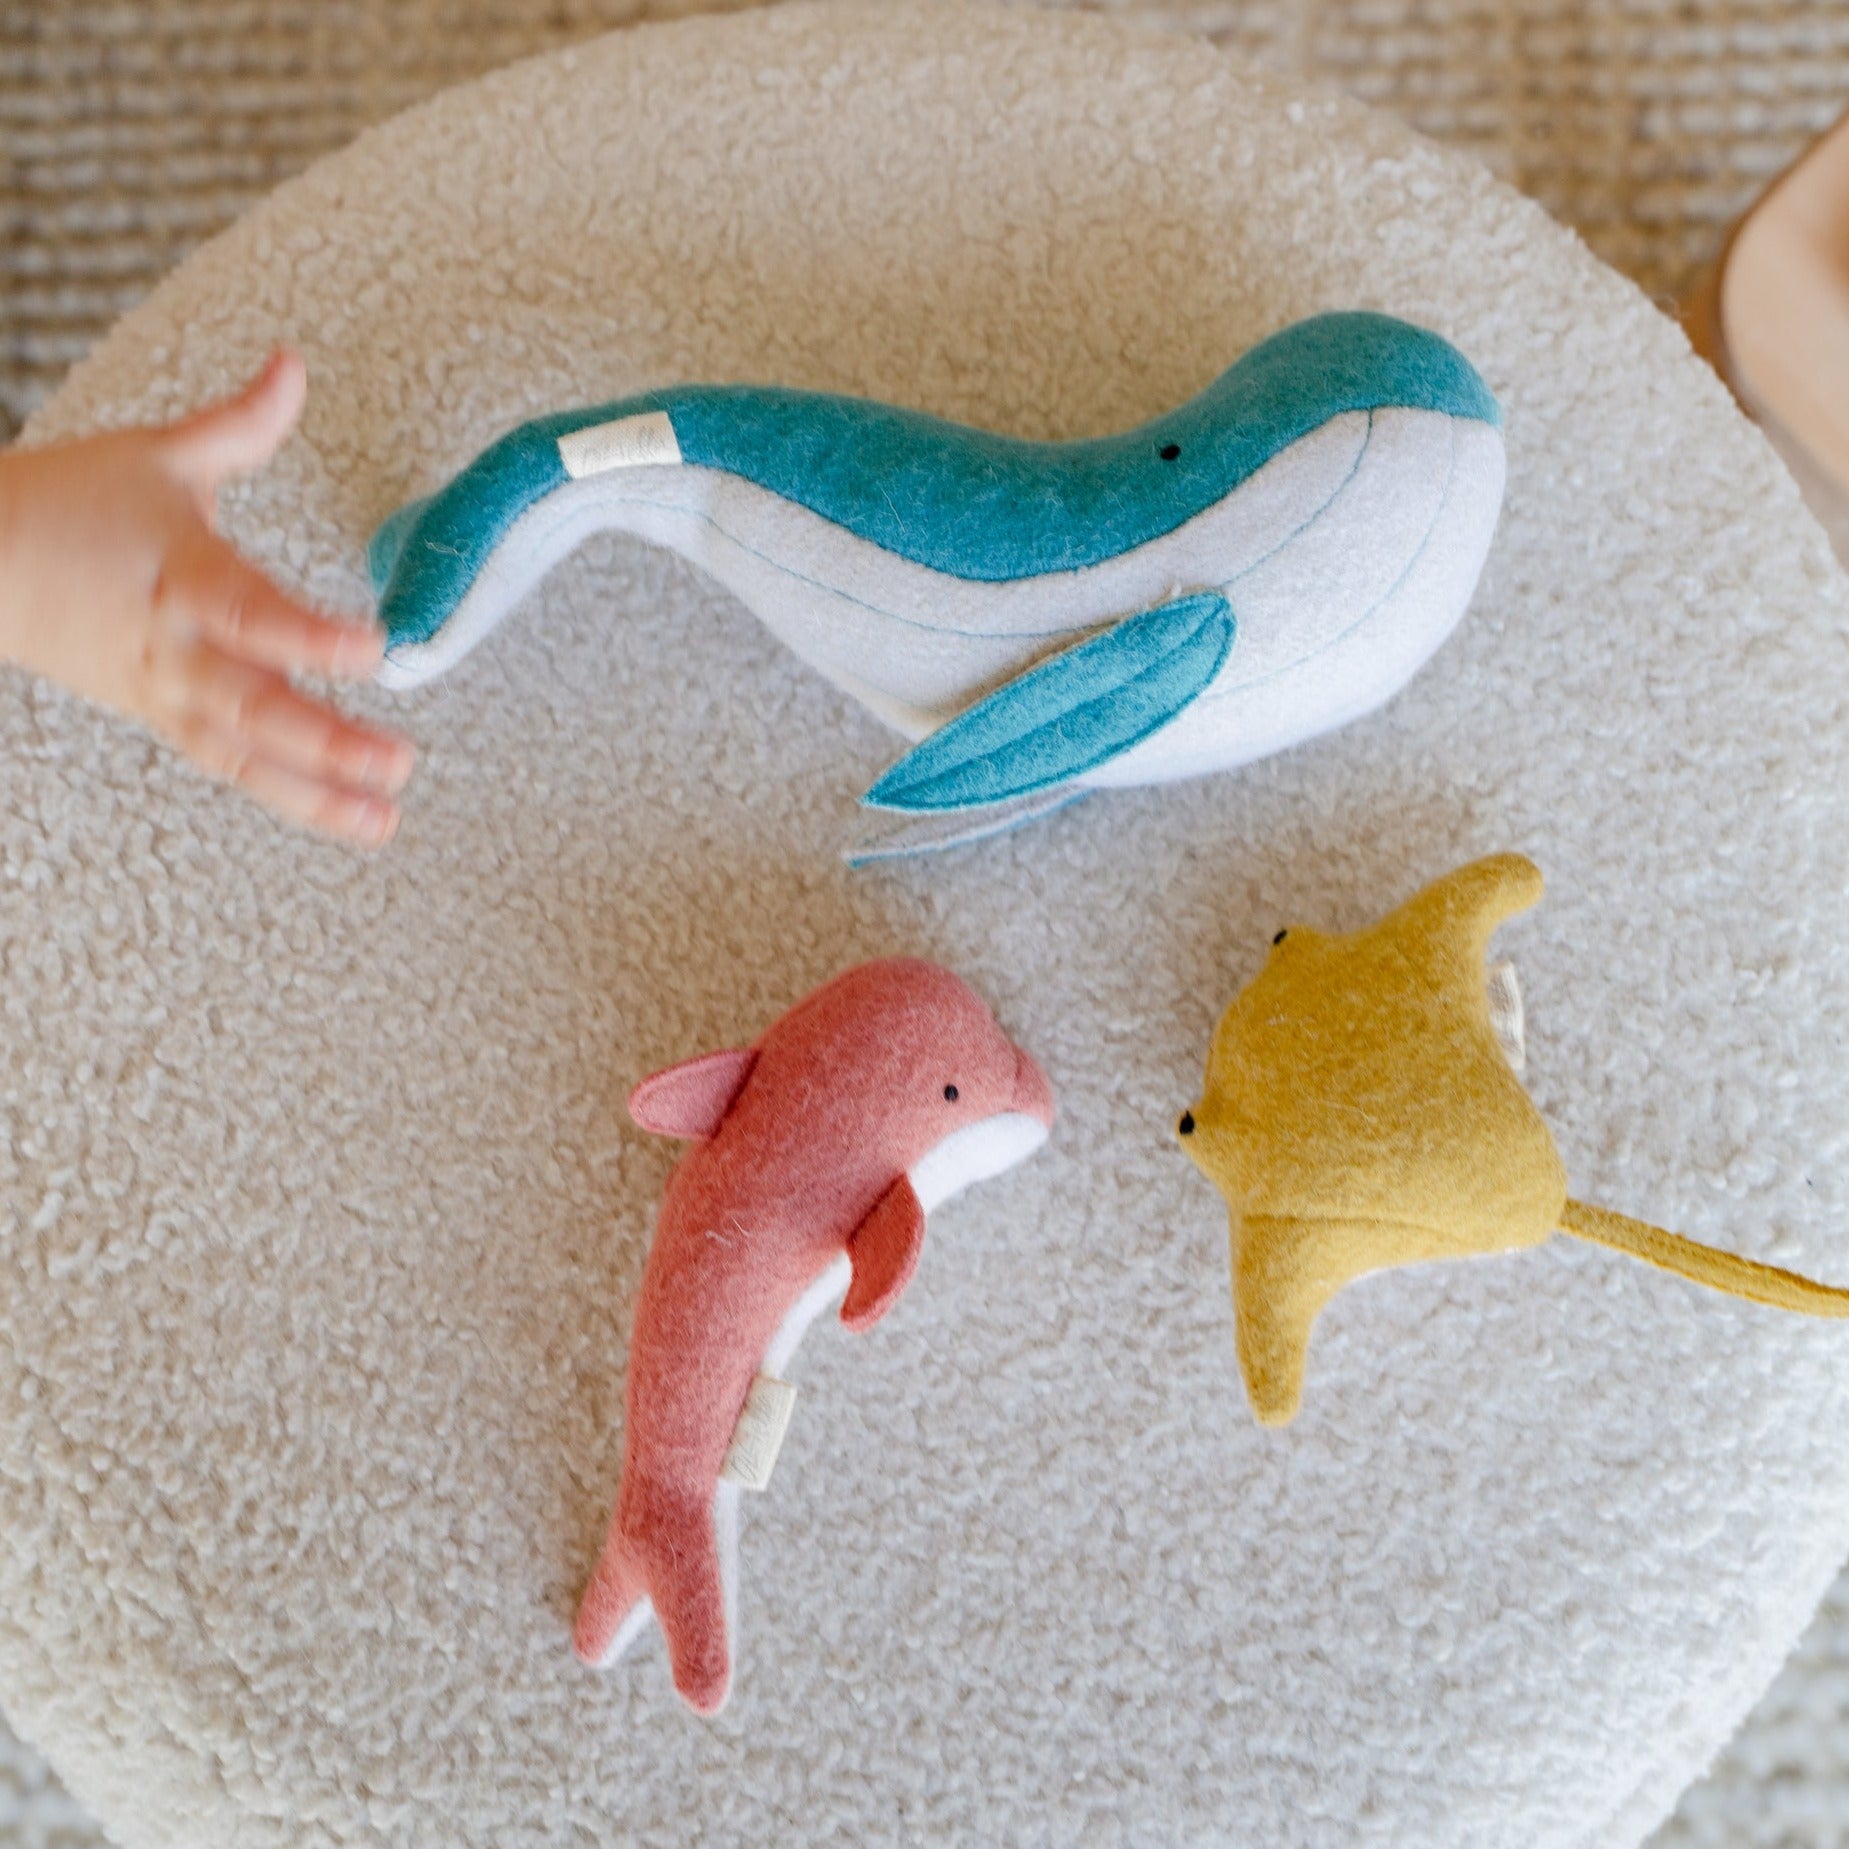 A child is engaging in imaginative play, reaching out to a Holdie Folk - Ocean Animals from Olli Ella in the ocean.